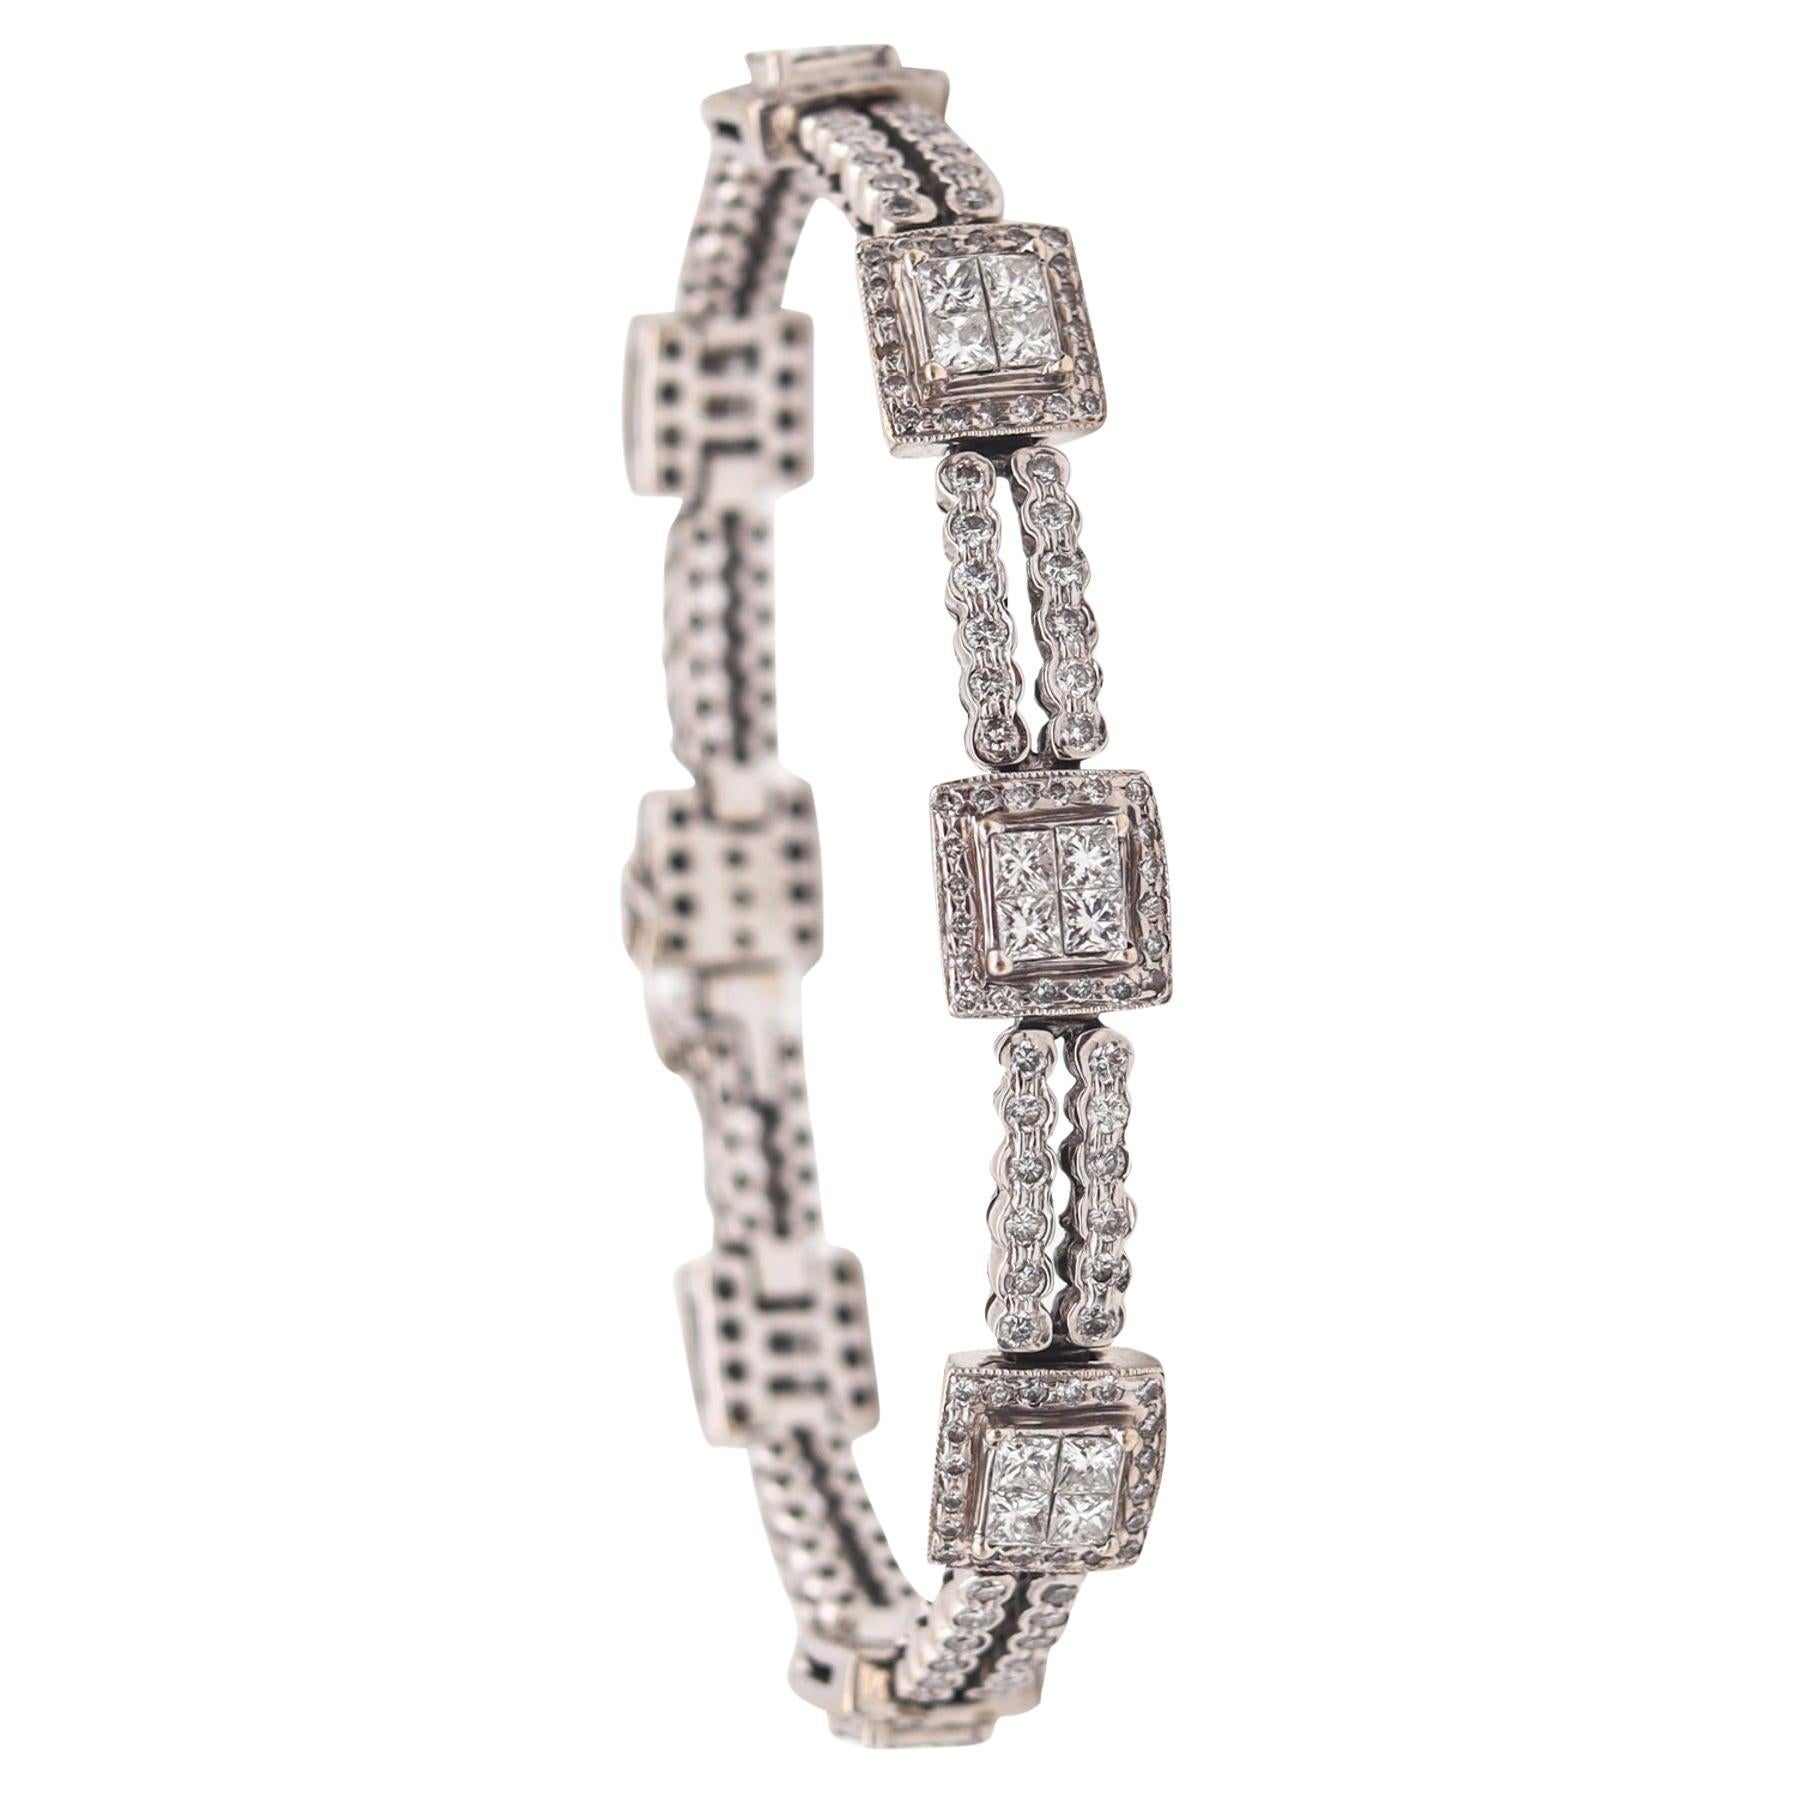 Italian Modernist Station Bracelet In 18Kt White Gold With 7.44 Ctw In Diamonds For Sale